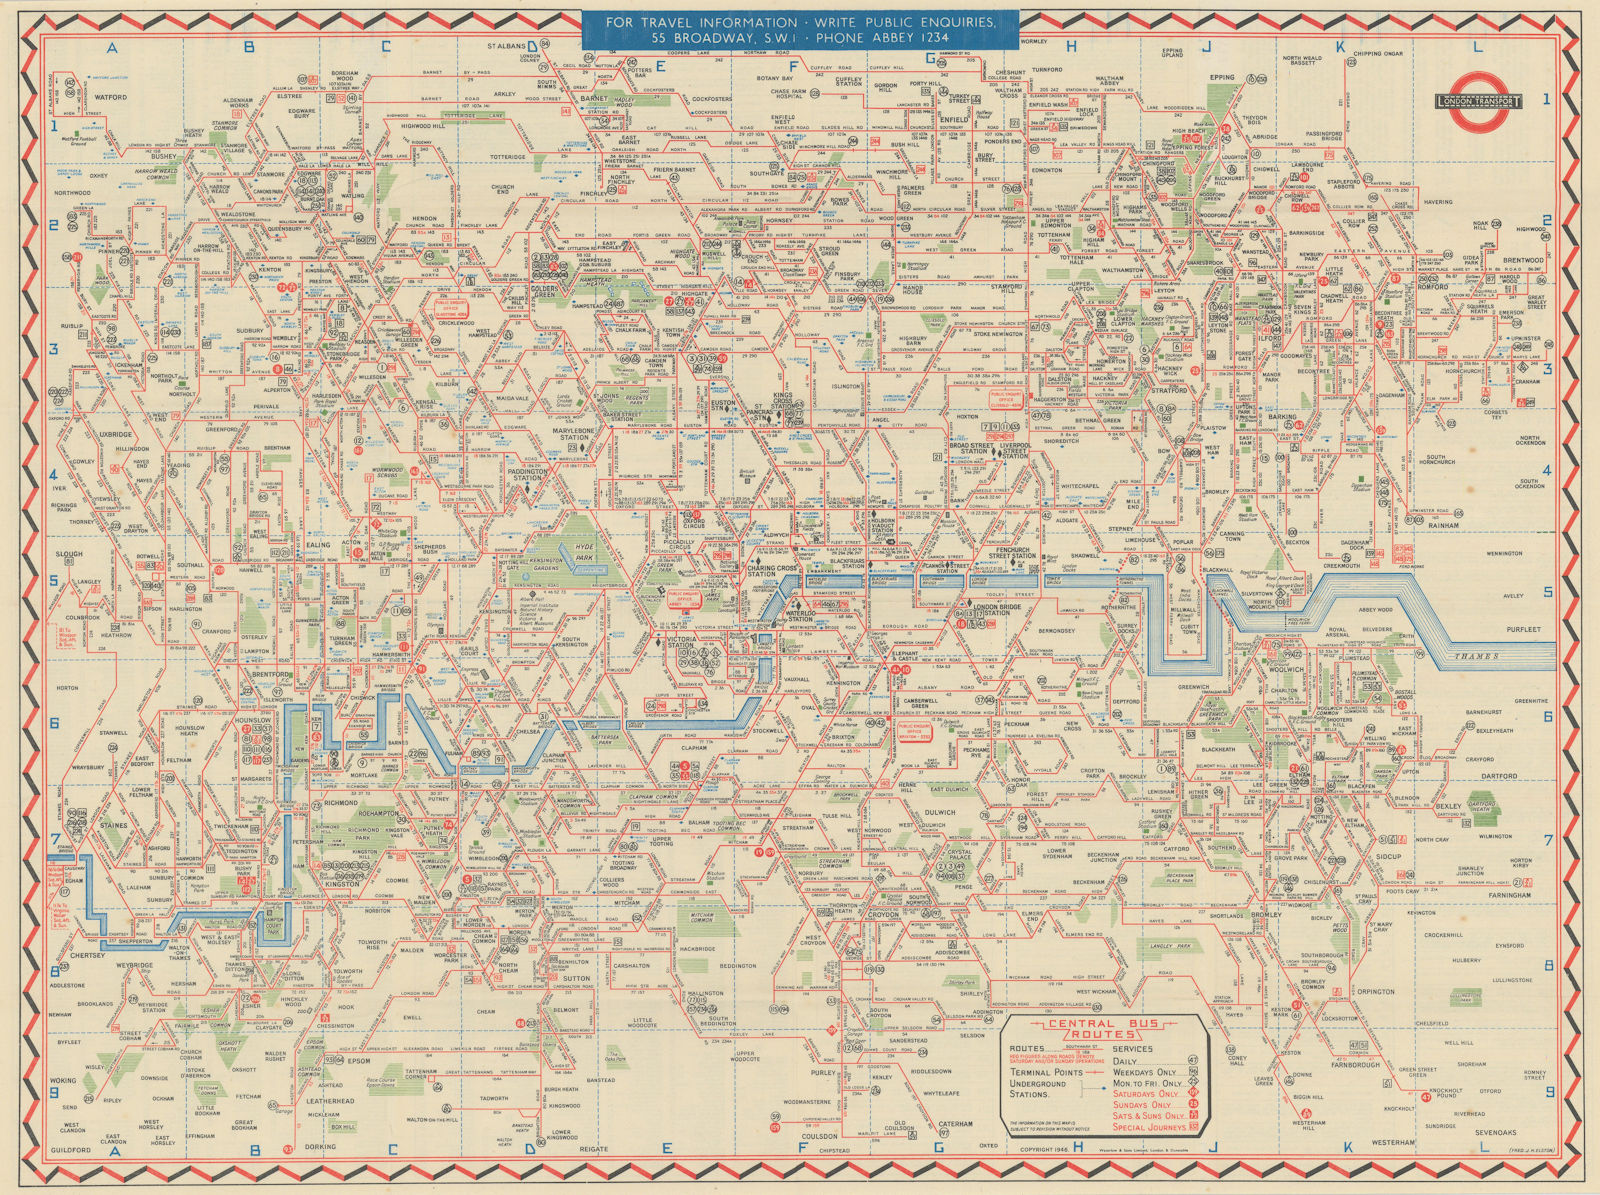 Associate Product London Transport Bus map Central Area. ELSTON. #1 1946 old vintage chart